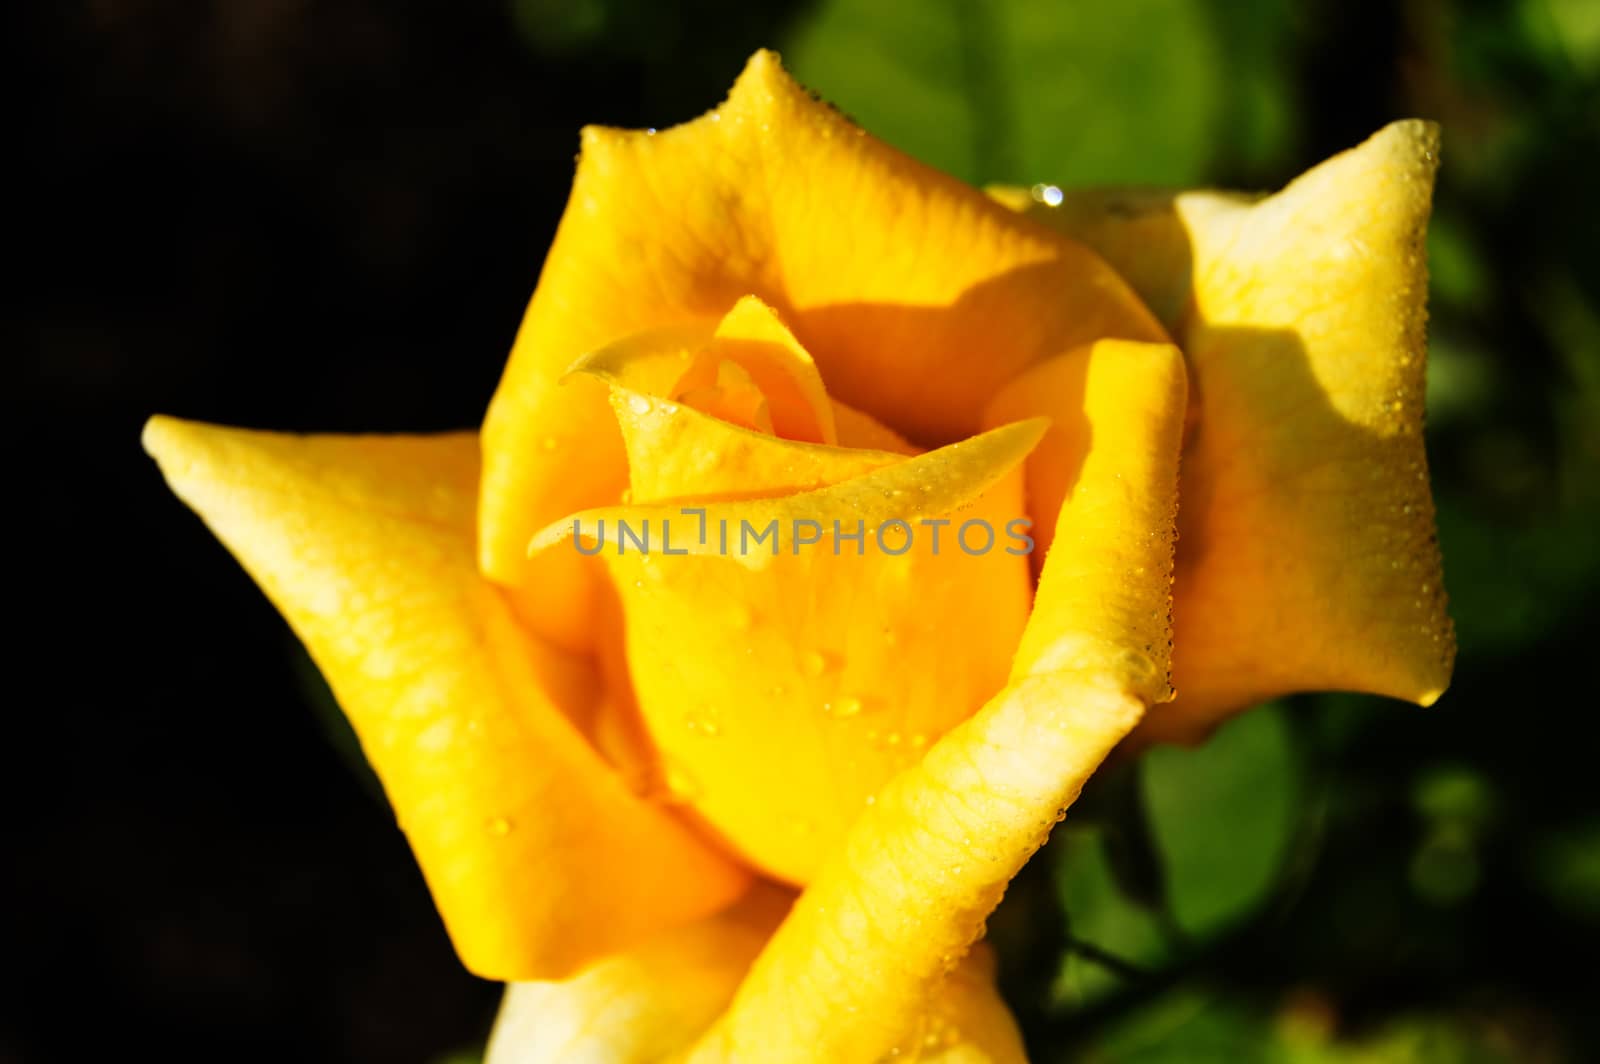 Beautiful yellow rose blooms in the garden on black background, greeting card concept, bright sunlight.